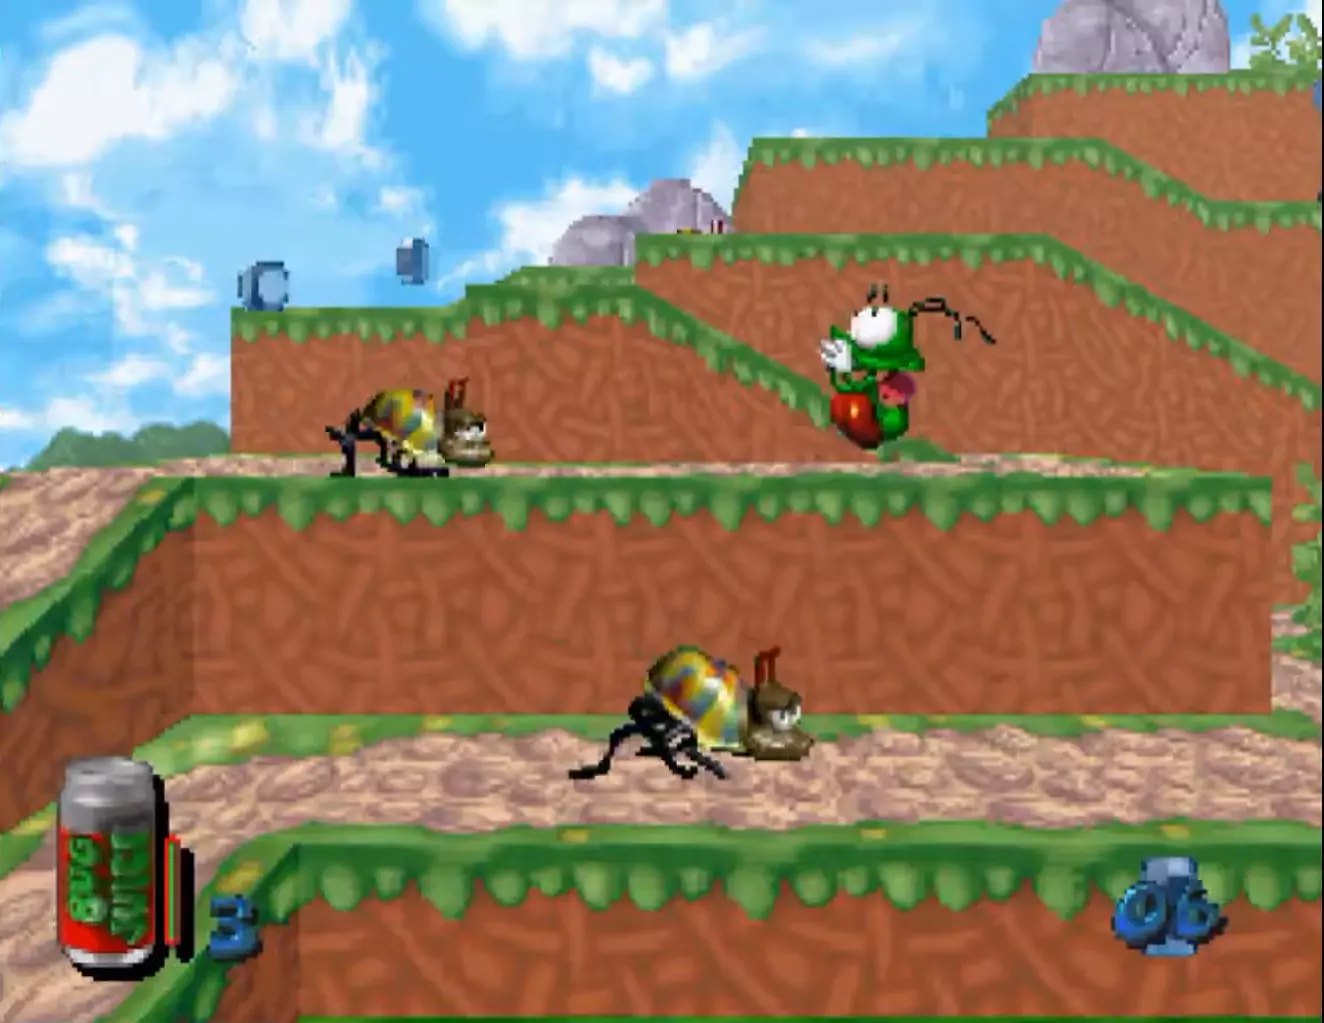 A 2.5 Platformer from 1995 called "Bug!" which lets the player control a green insect that jumps on other green insects.